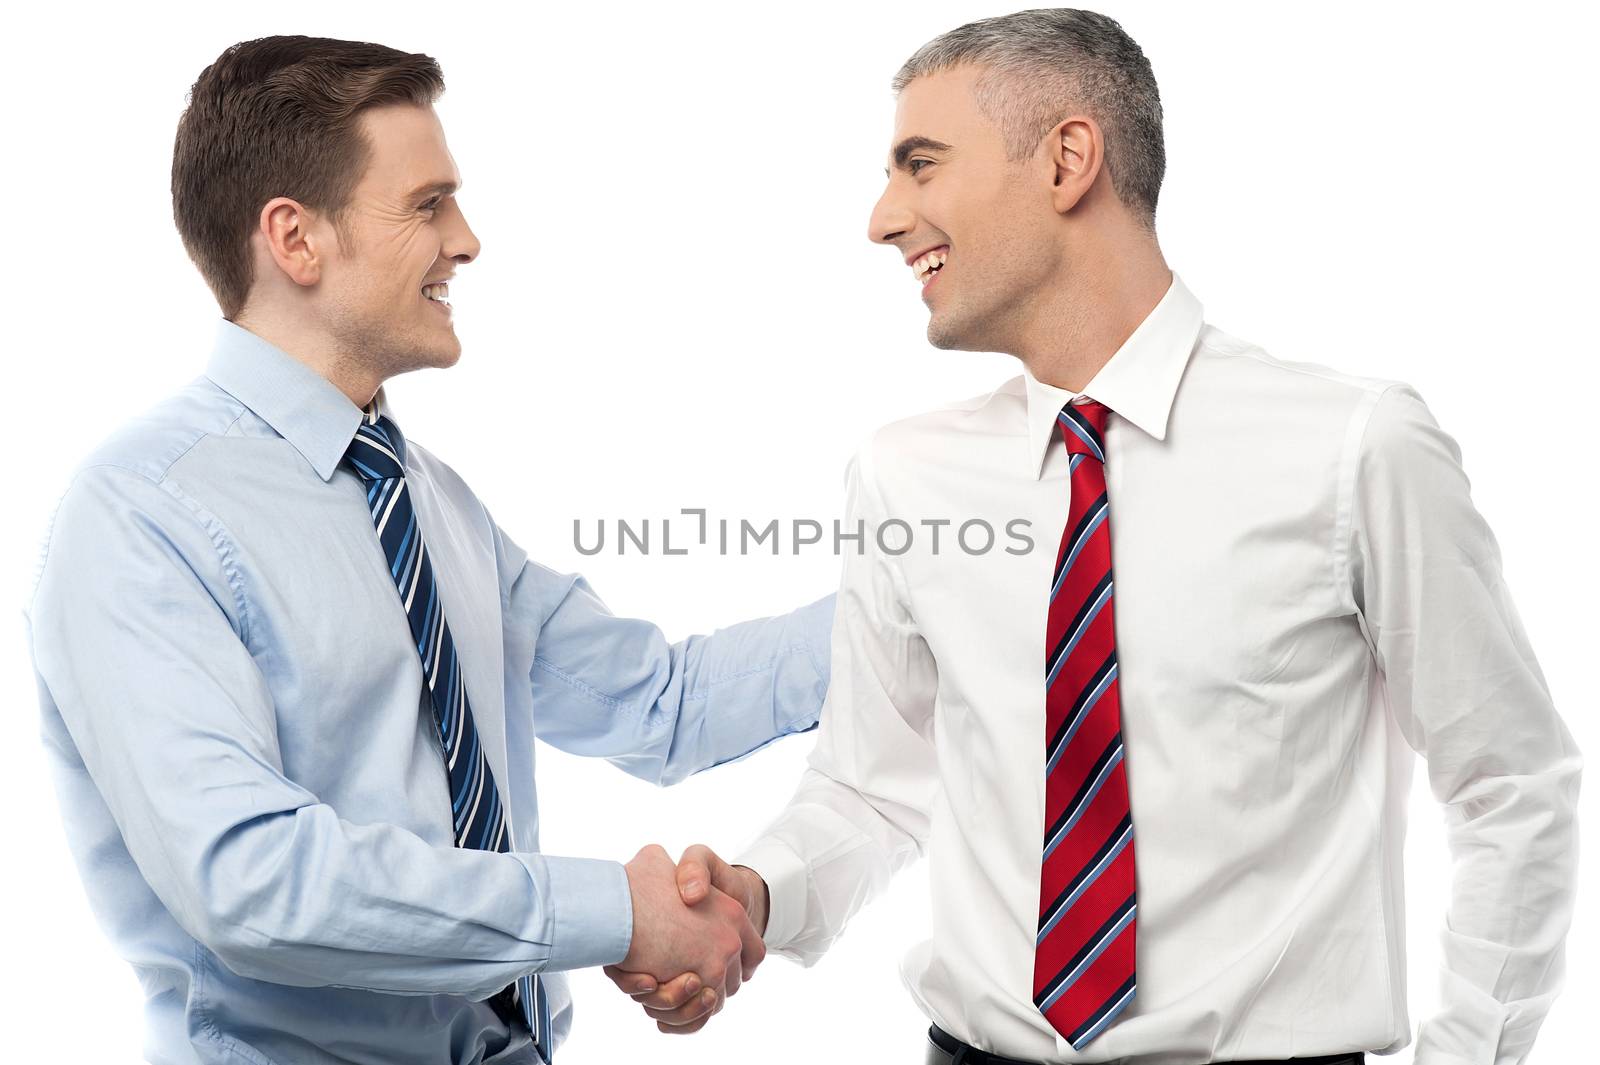 Business people shaking hands over a deal